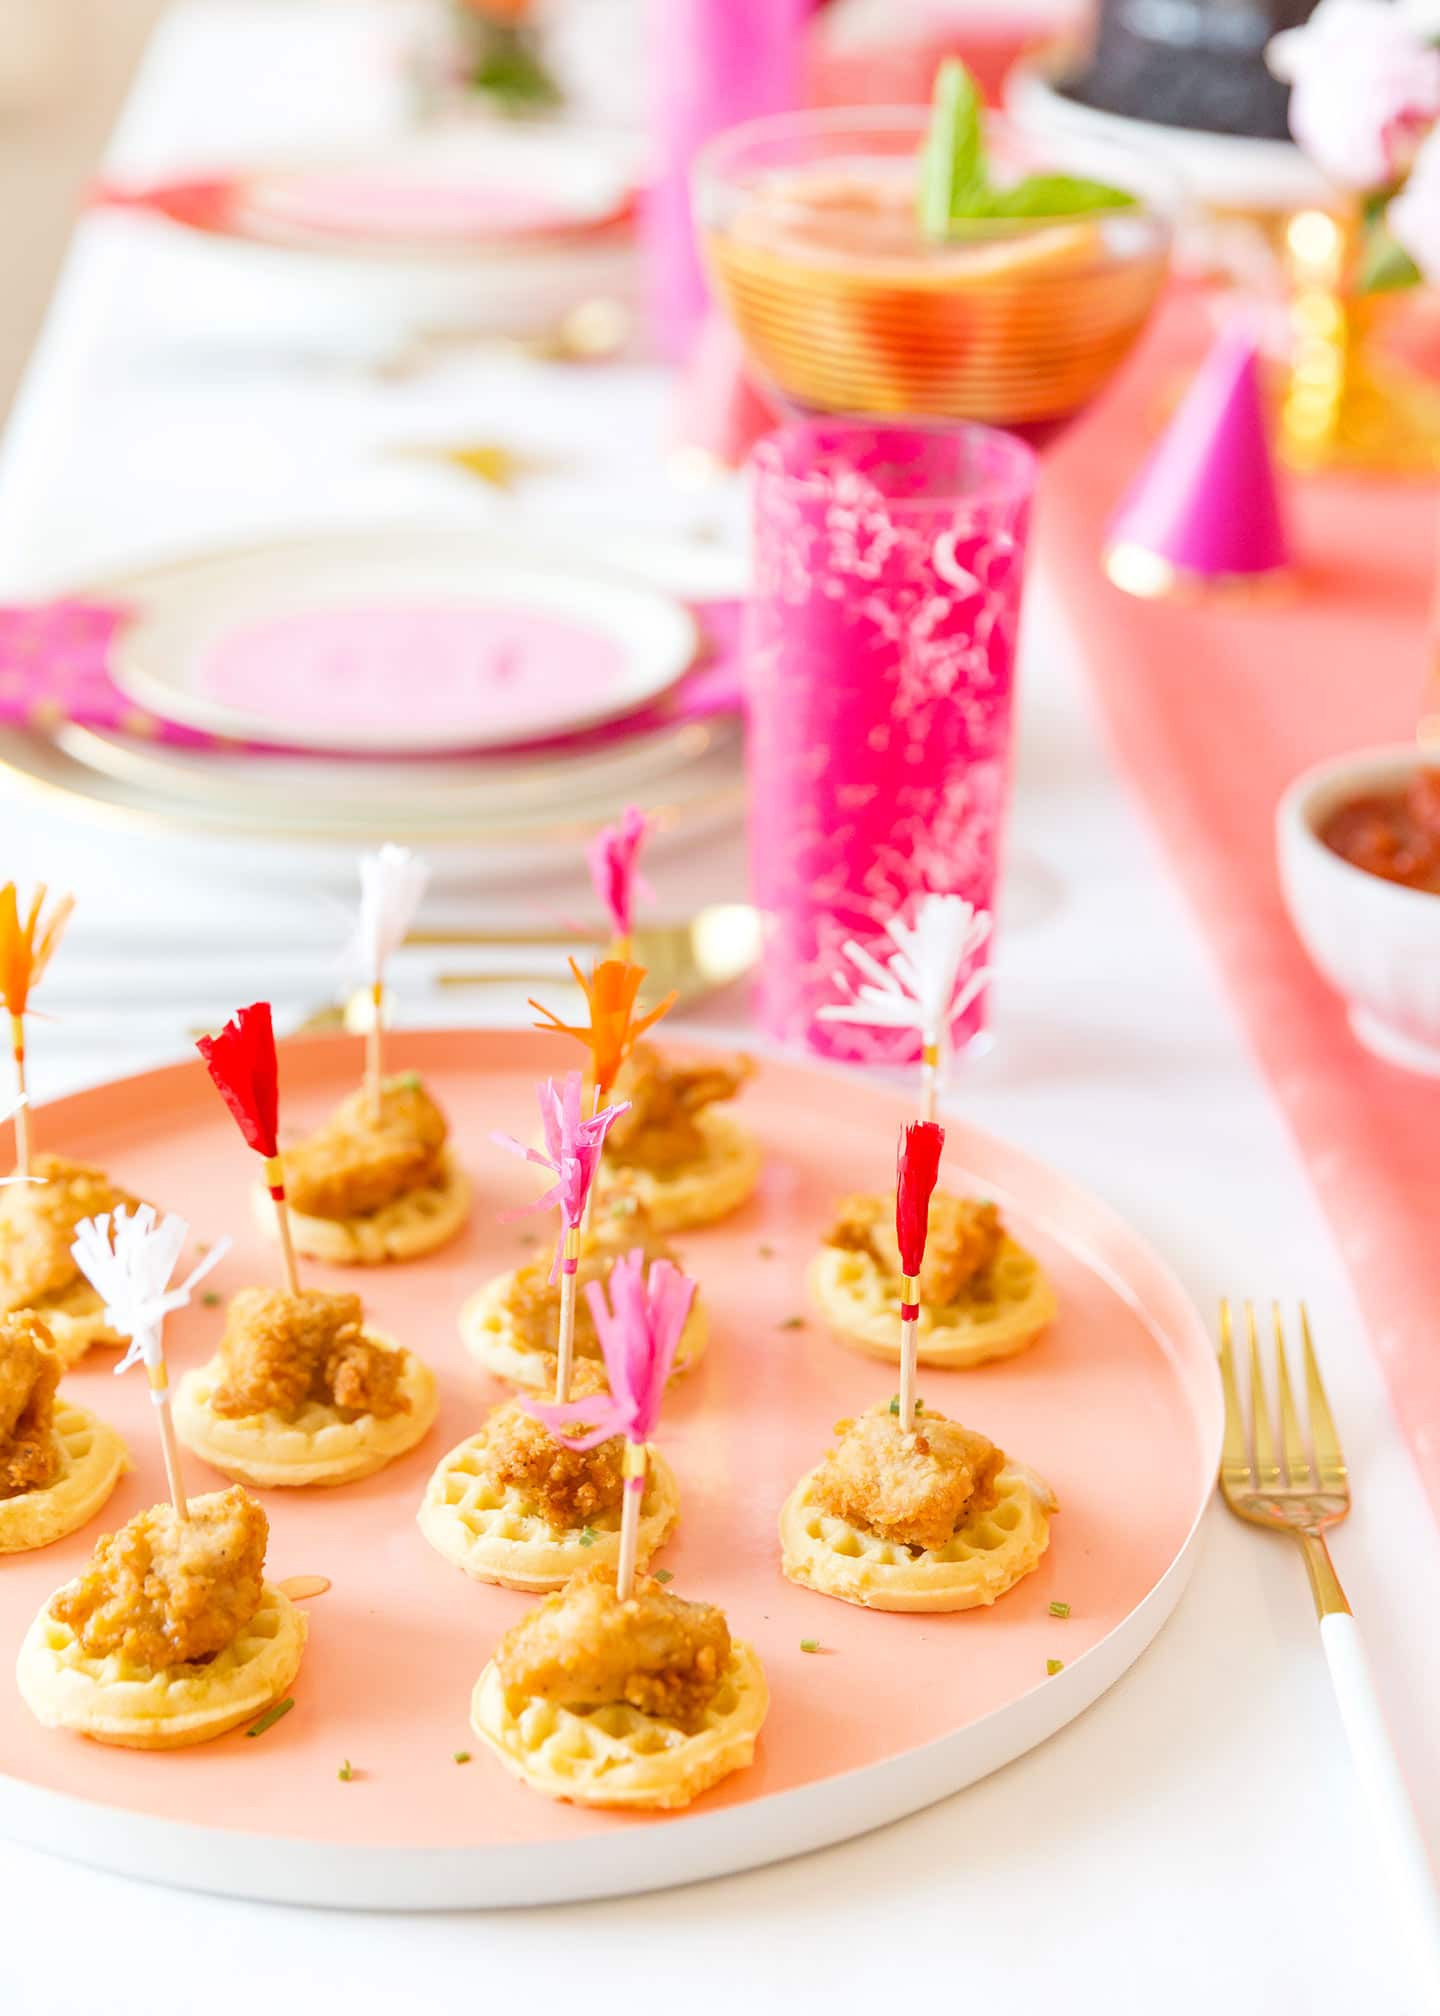 Girl Birthday Party Food Ideas
 Creative Adult Birthday Party Ideas for the Girls